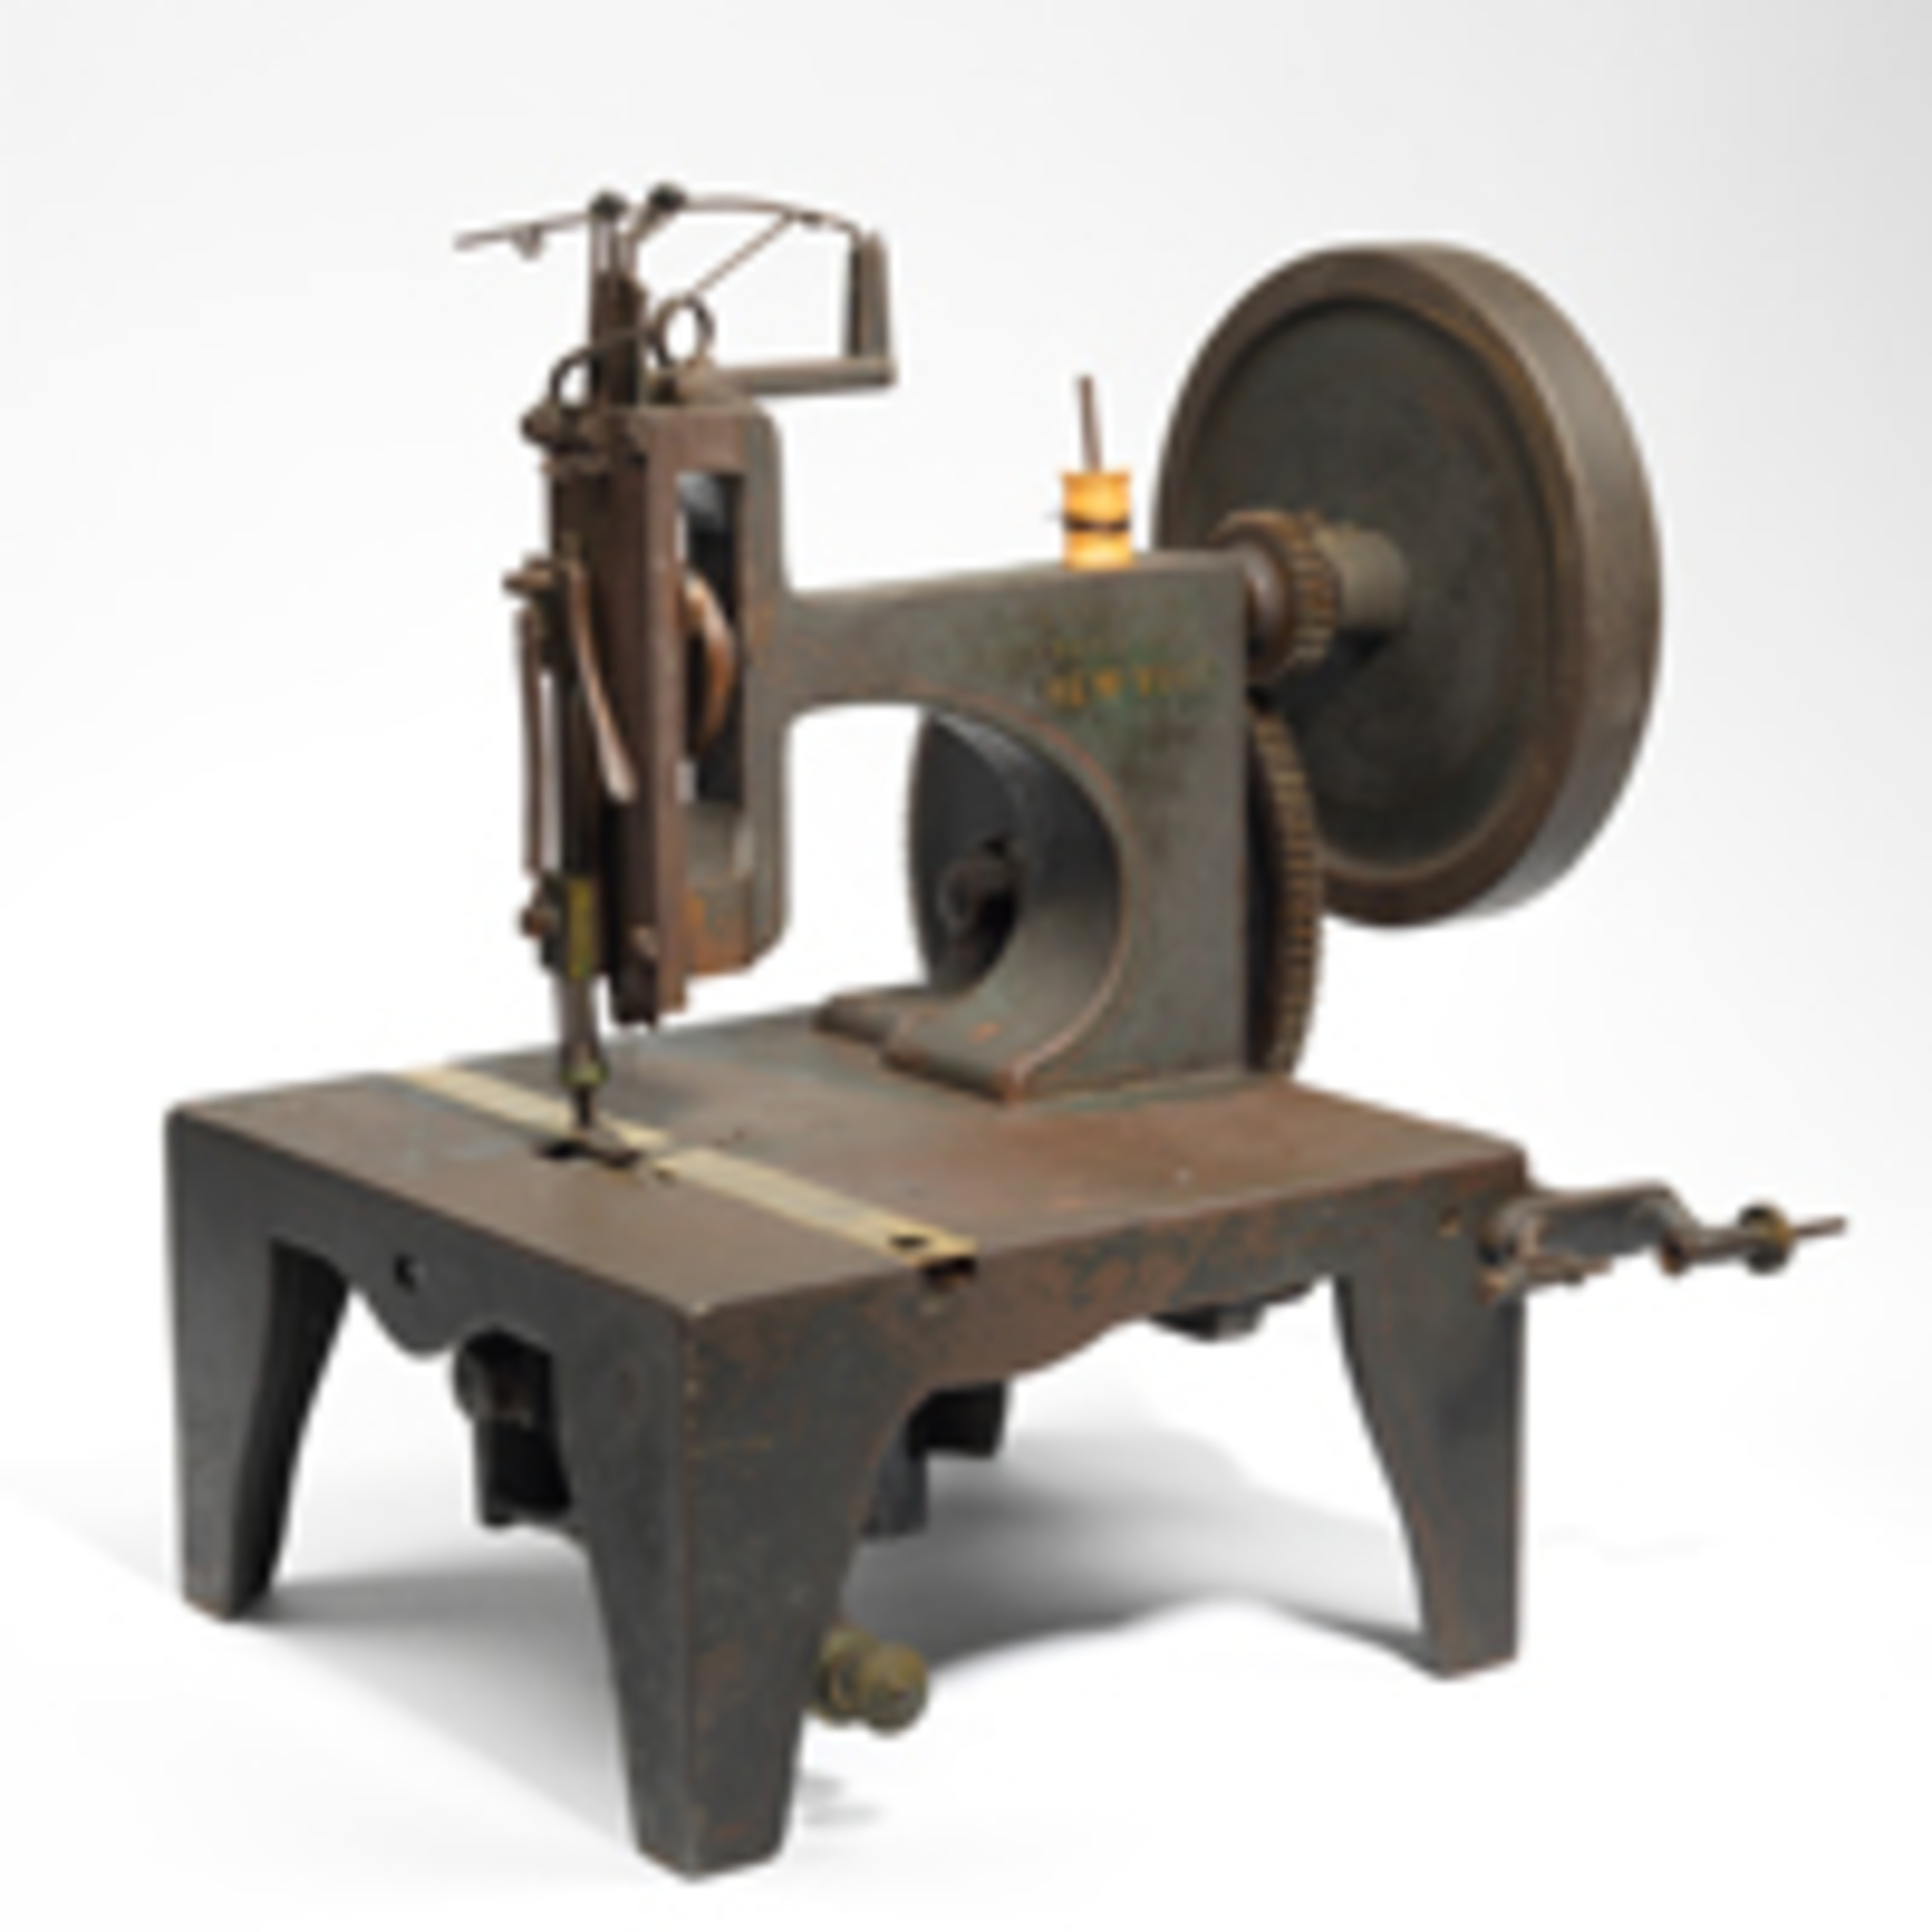 A History of Singer Sewing Machines - Direct Sewing Machines